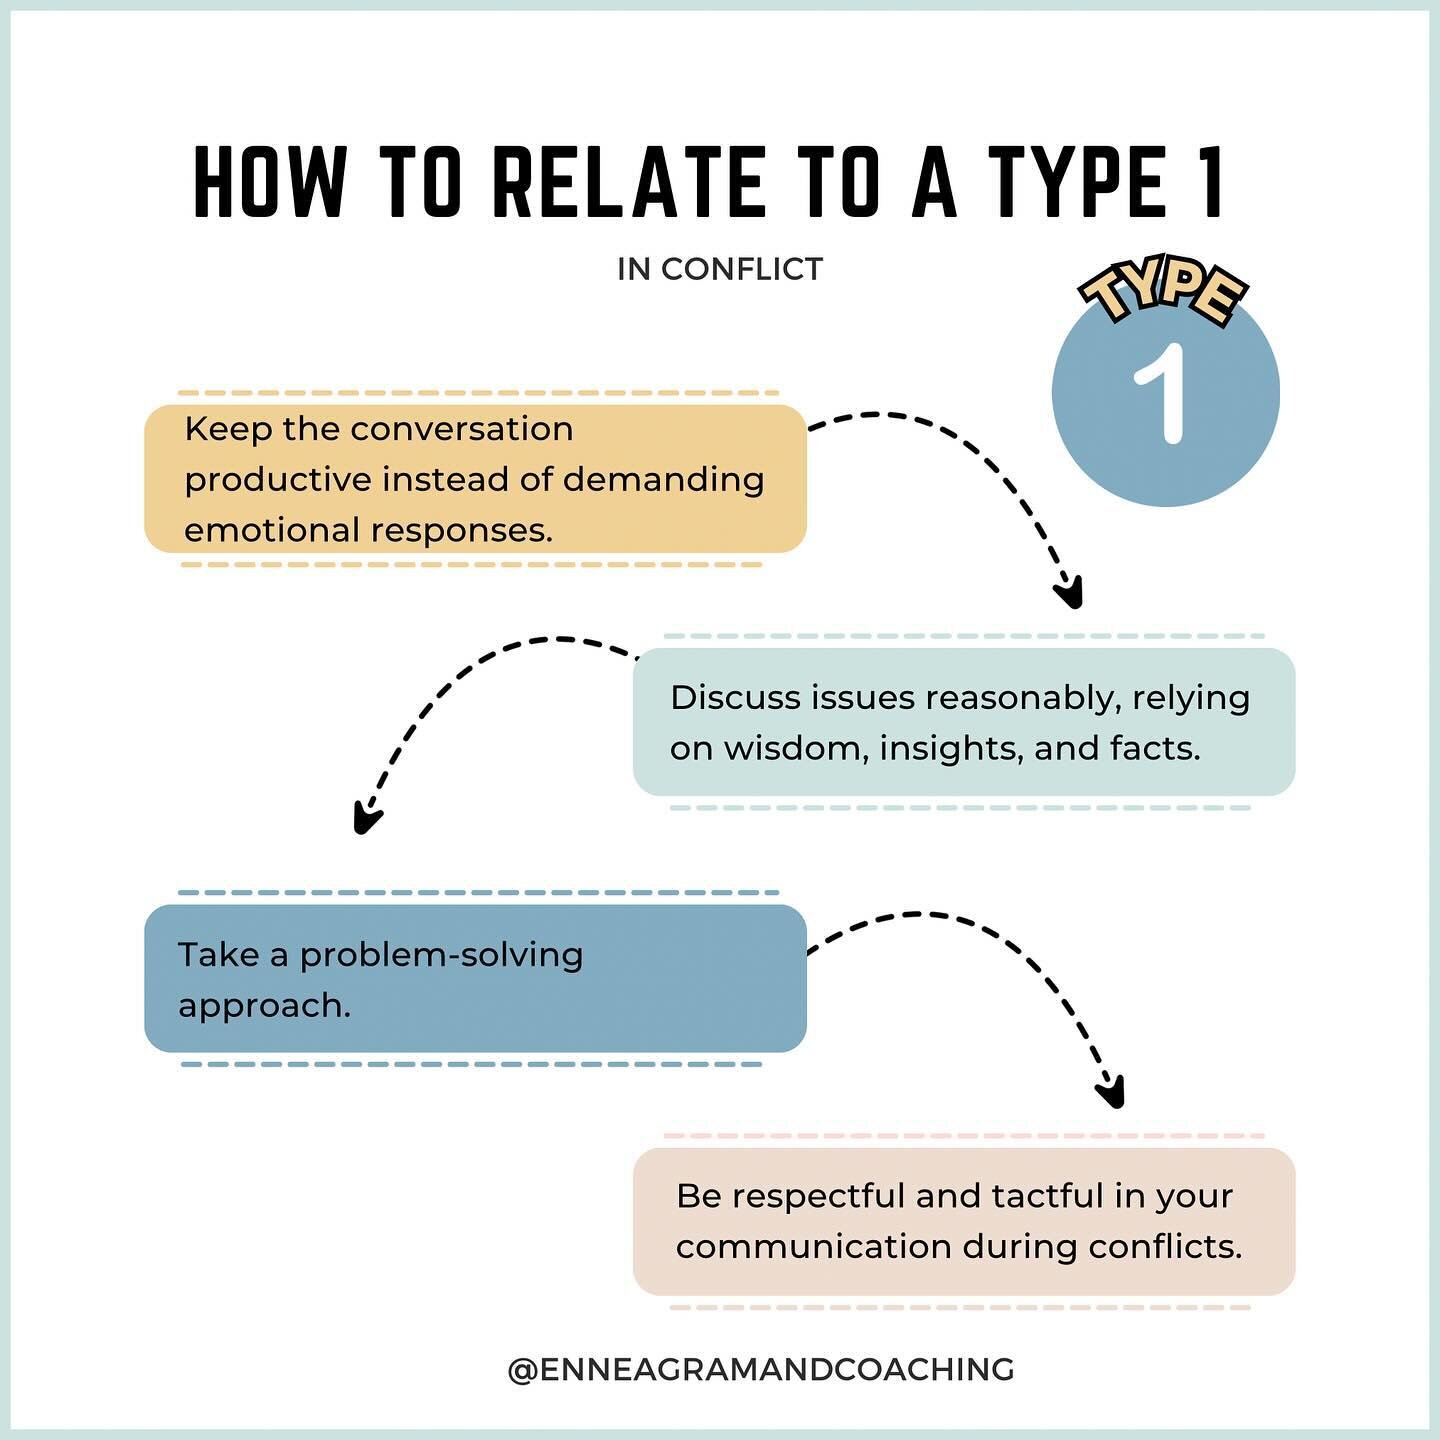 Enneagram - How to Relate to Types In Conflict &ldquo;All 9 Types&rdquo; What is your type and which one stands out the most? ⤵️ 
.
.
.

#enneagraminstitute #enneagramjourney #enneagramtype #enneagramlife #enneagrammemes #enneagramtypes #enneagramtal